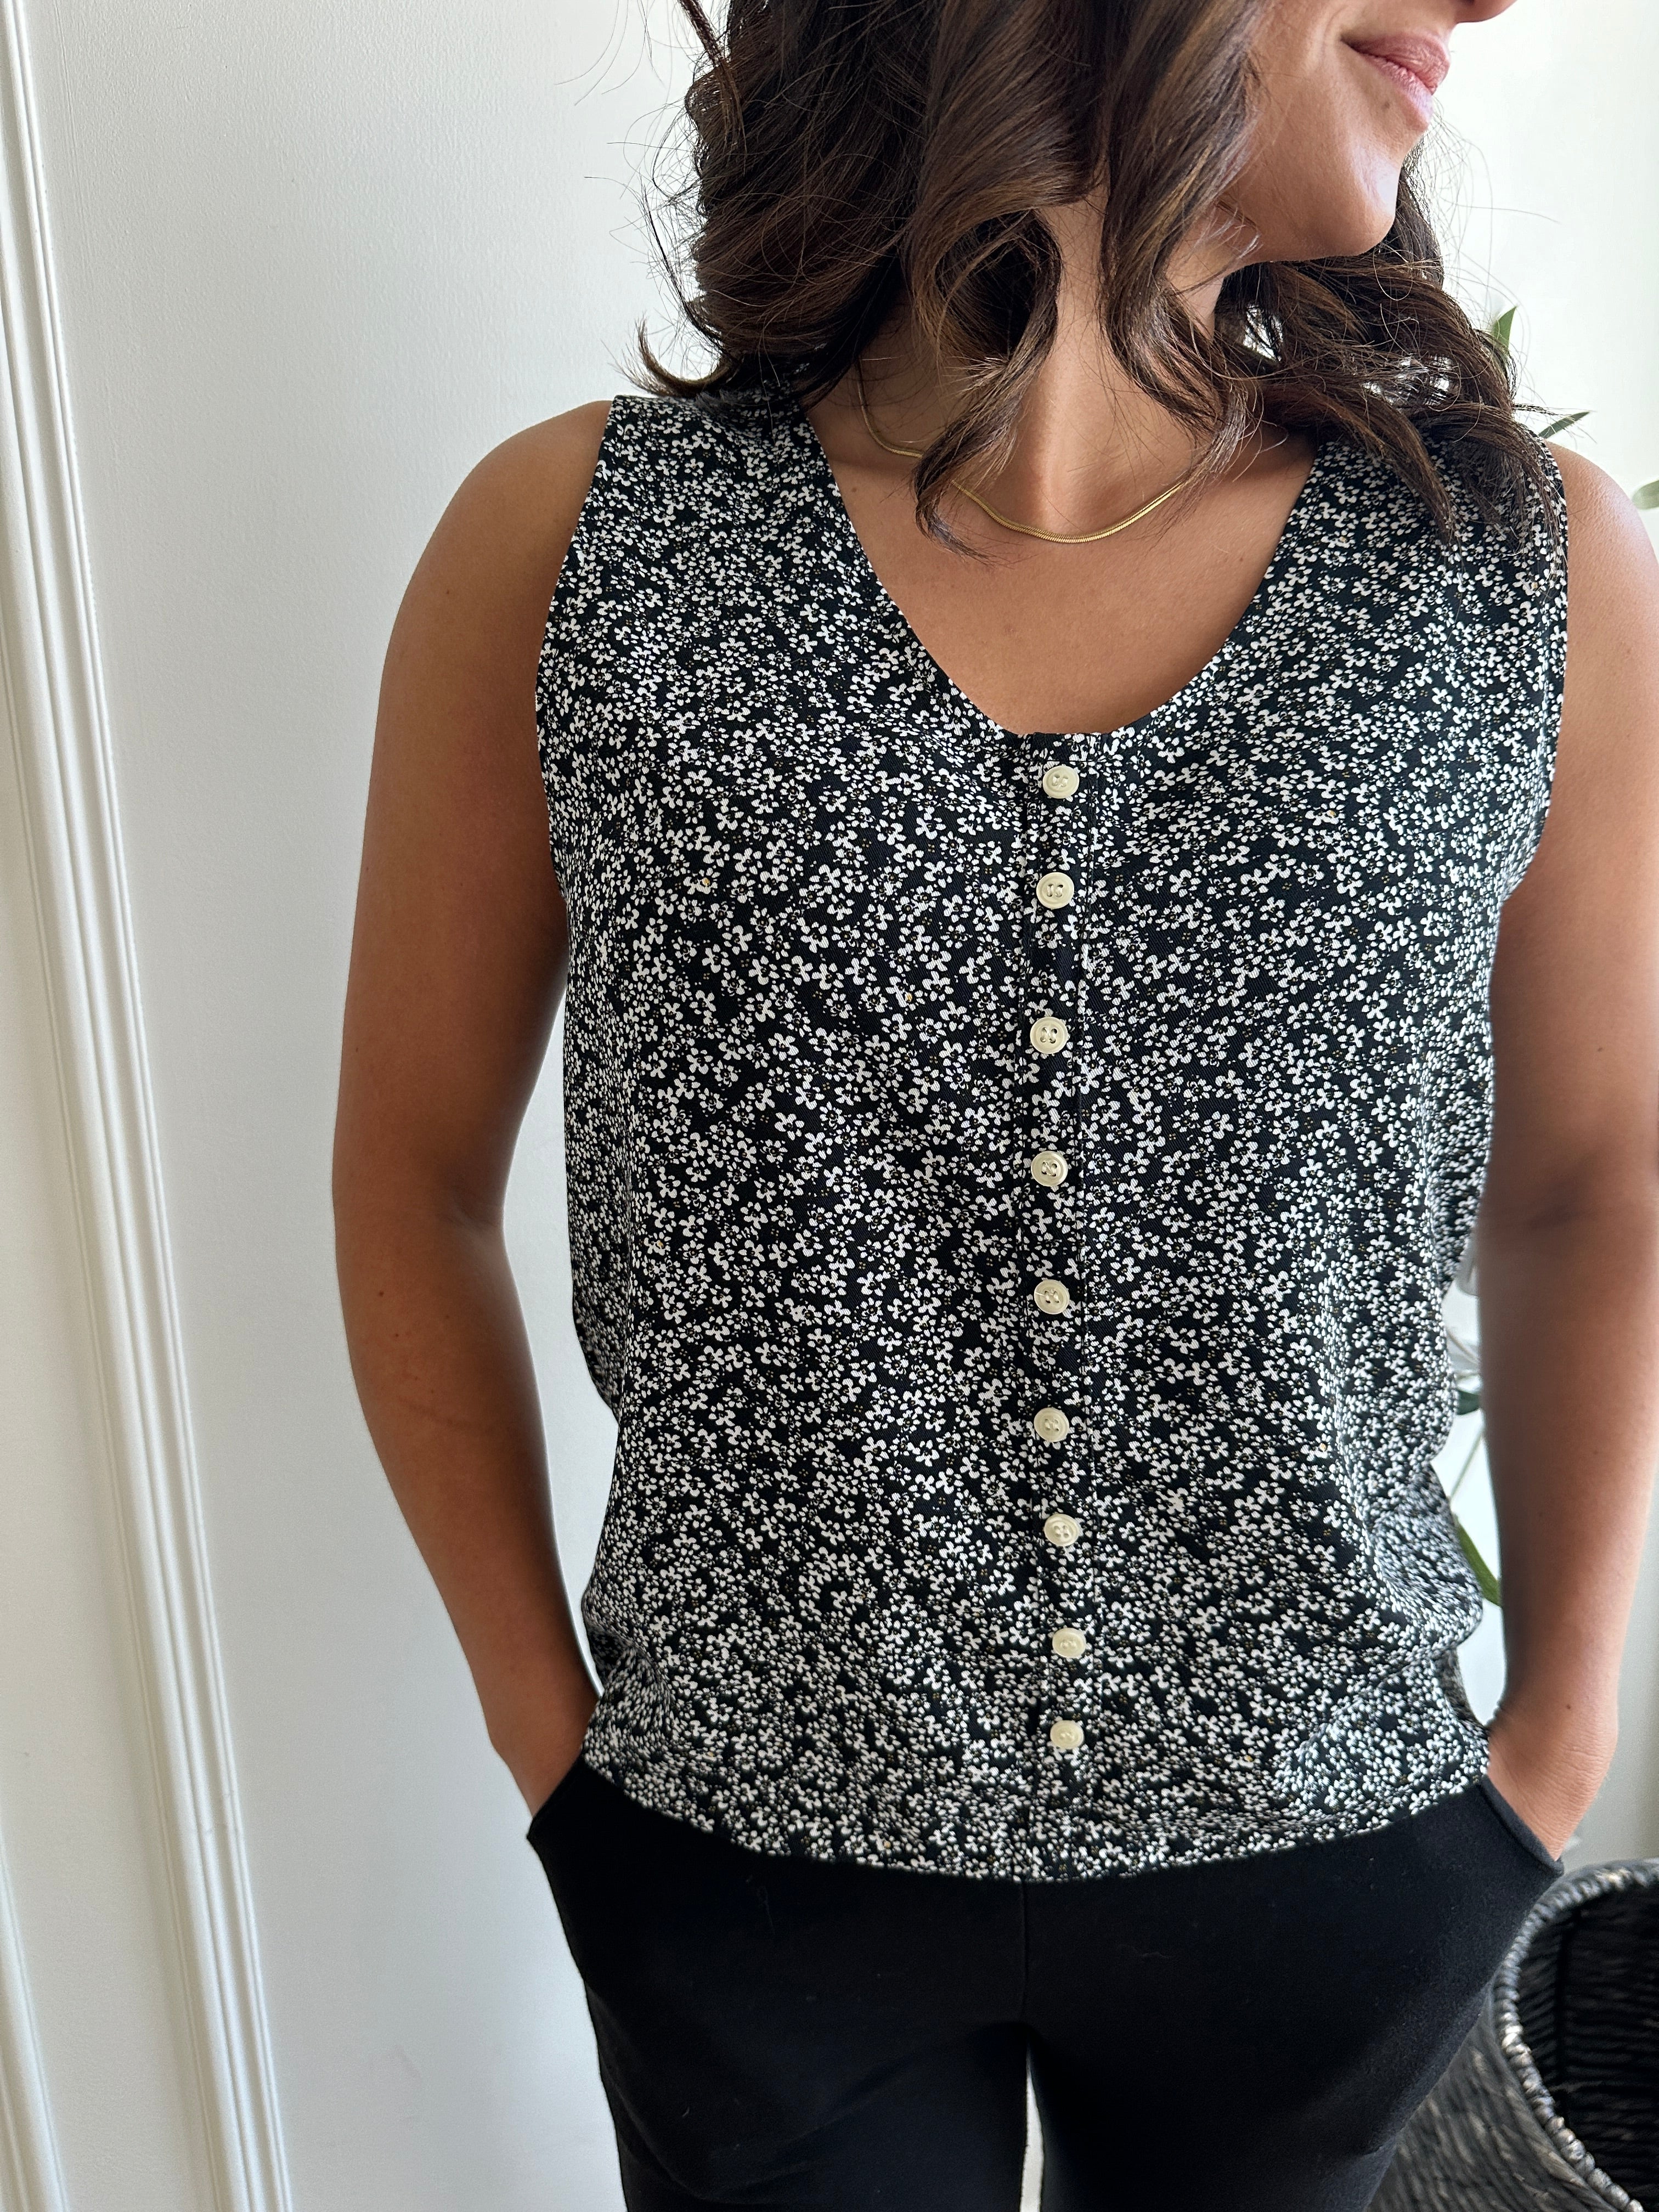 black and white floral loose fitting tank top with white buttons